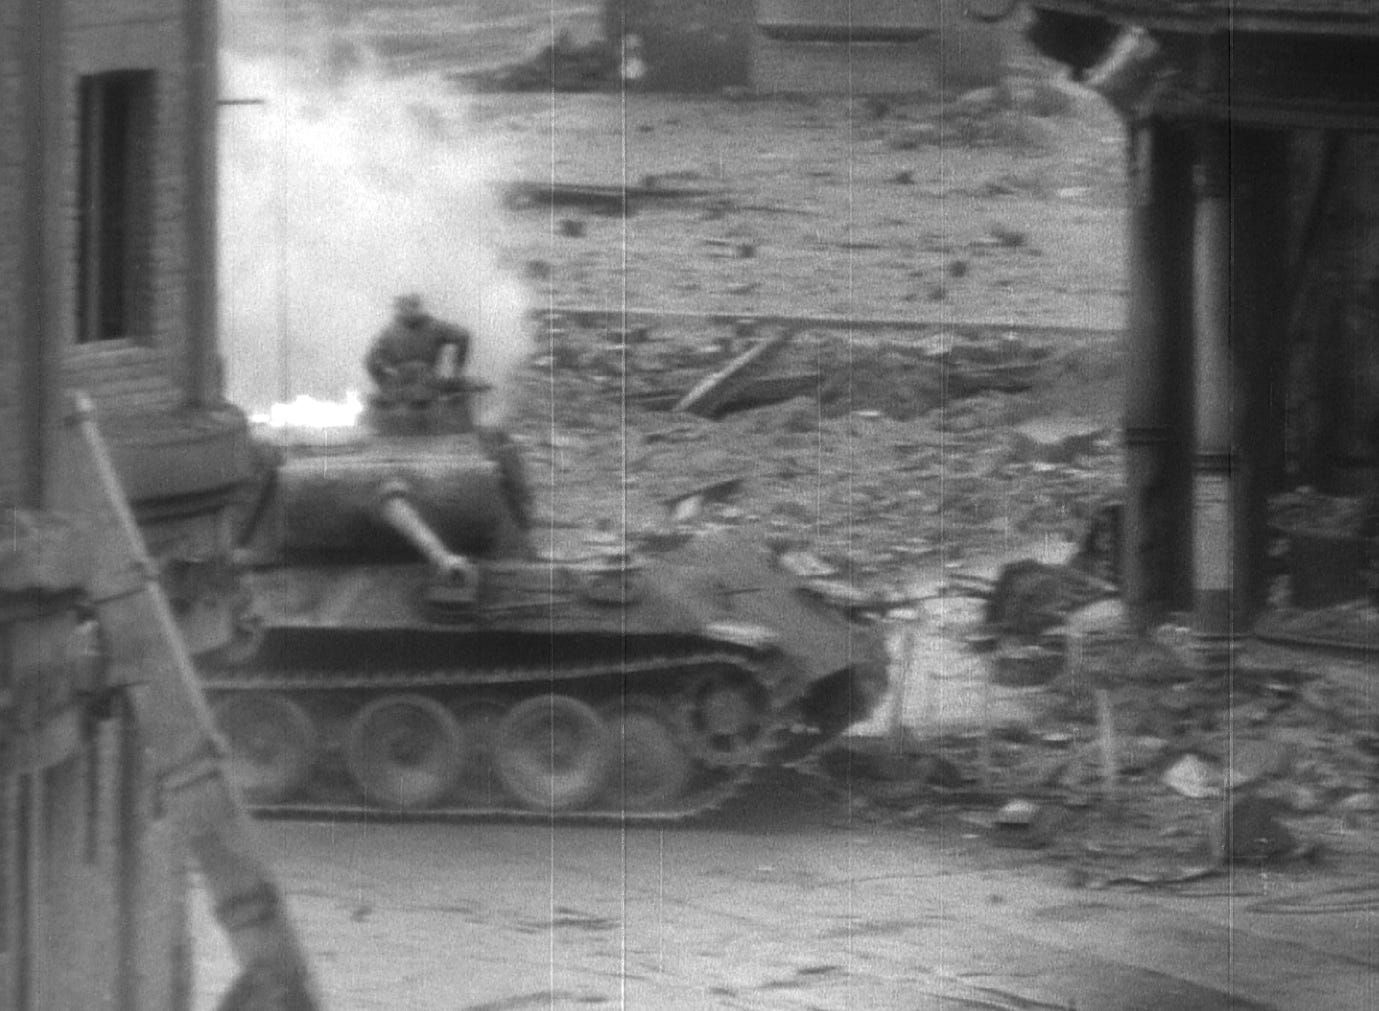 video of actual ww ii tank battle near the cathedral in cologne, germany